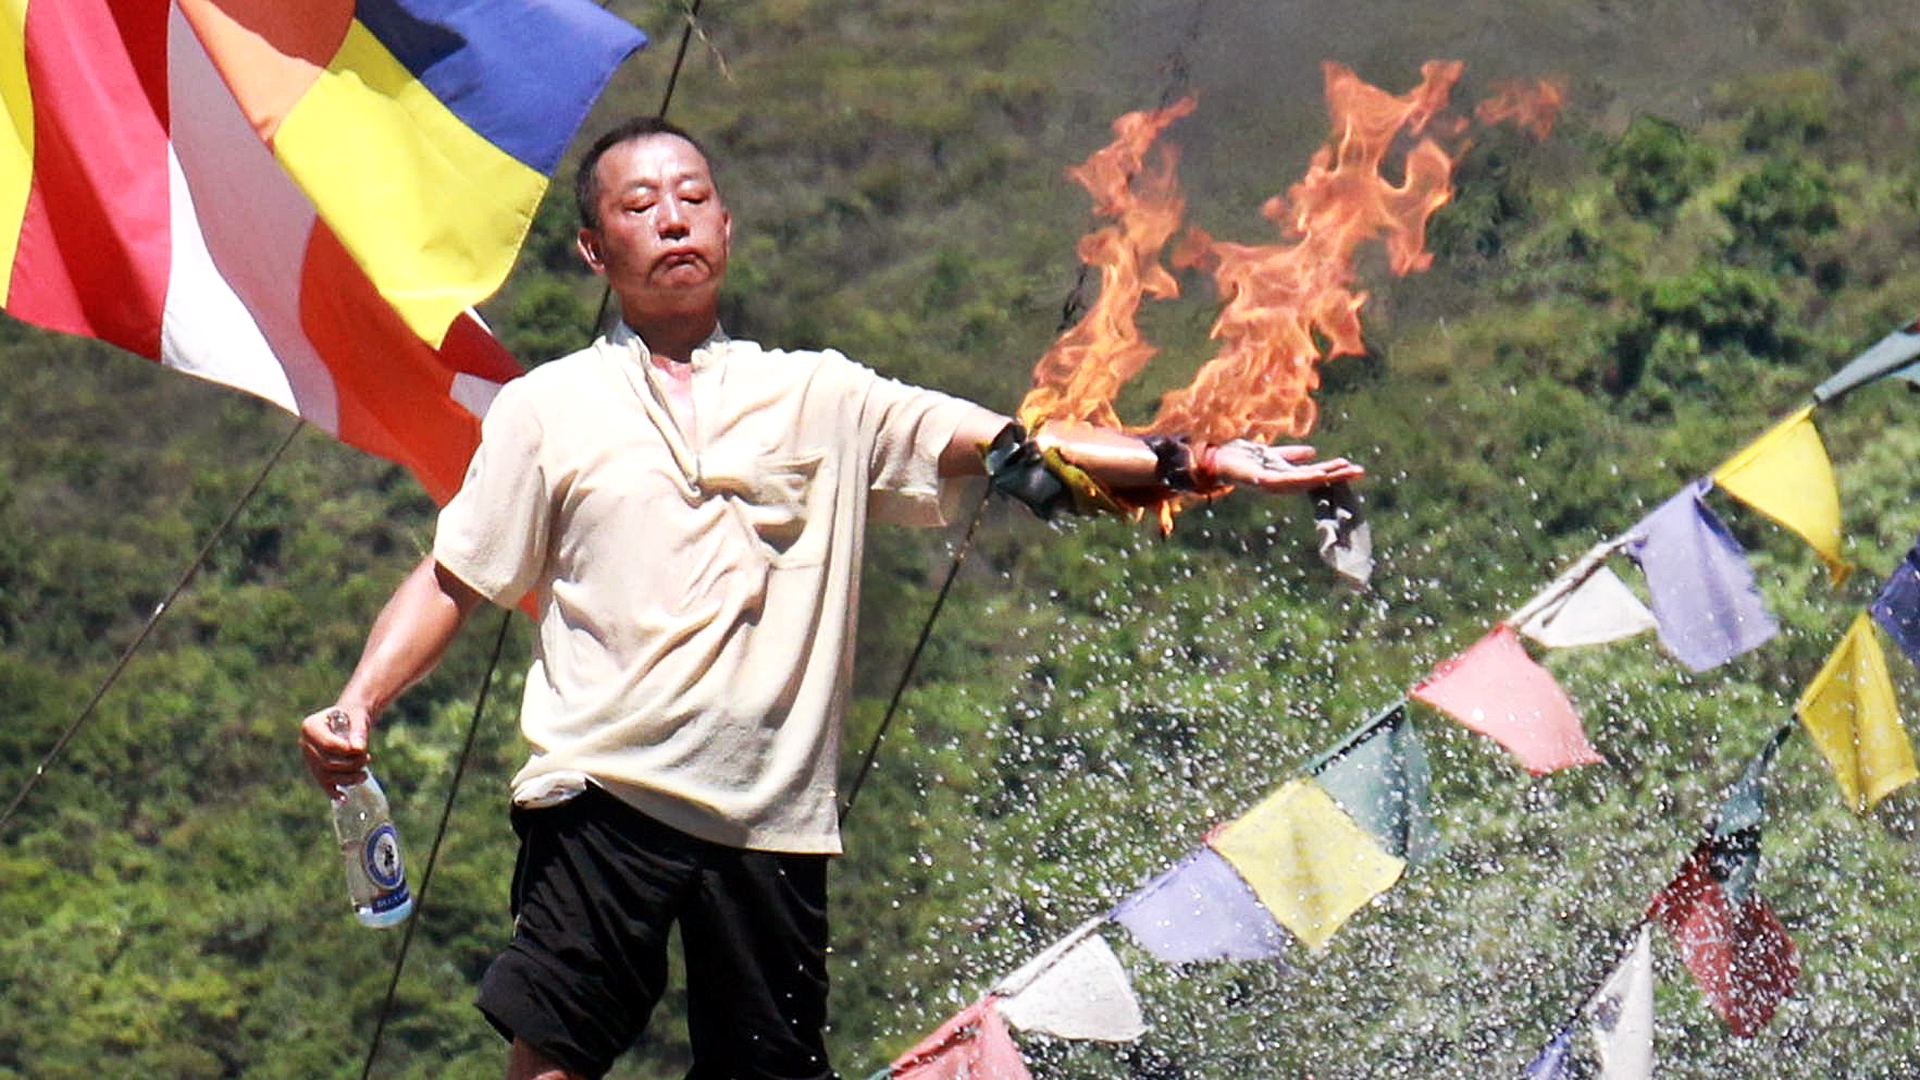 Lau Kin-kwok, chief of the Po Yin Fat Yuen monastery, set his left arm on fire. Photo: SCMP Pictures